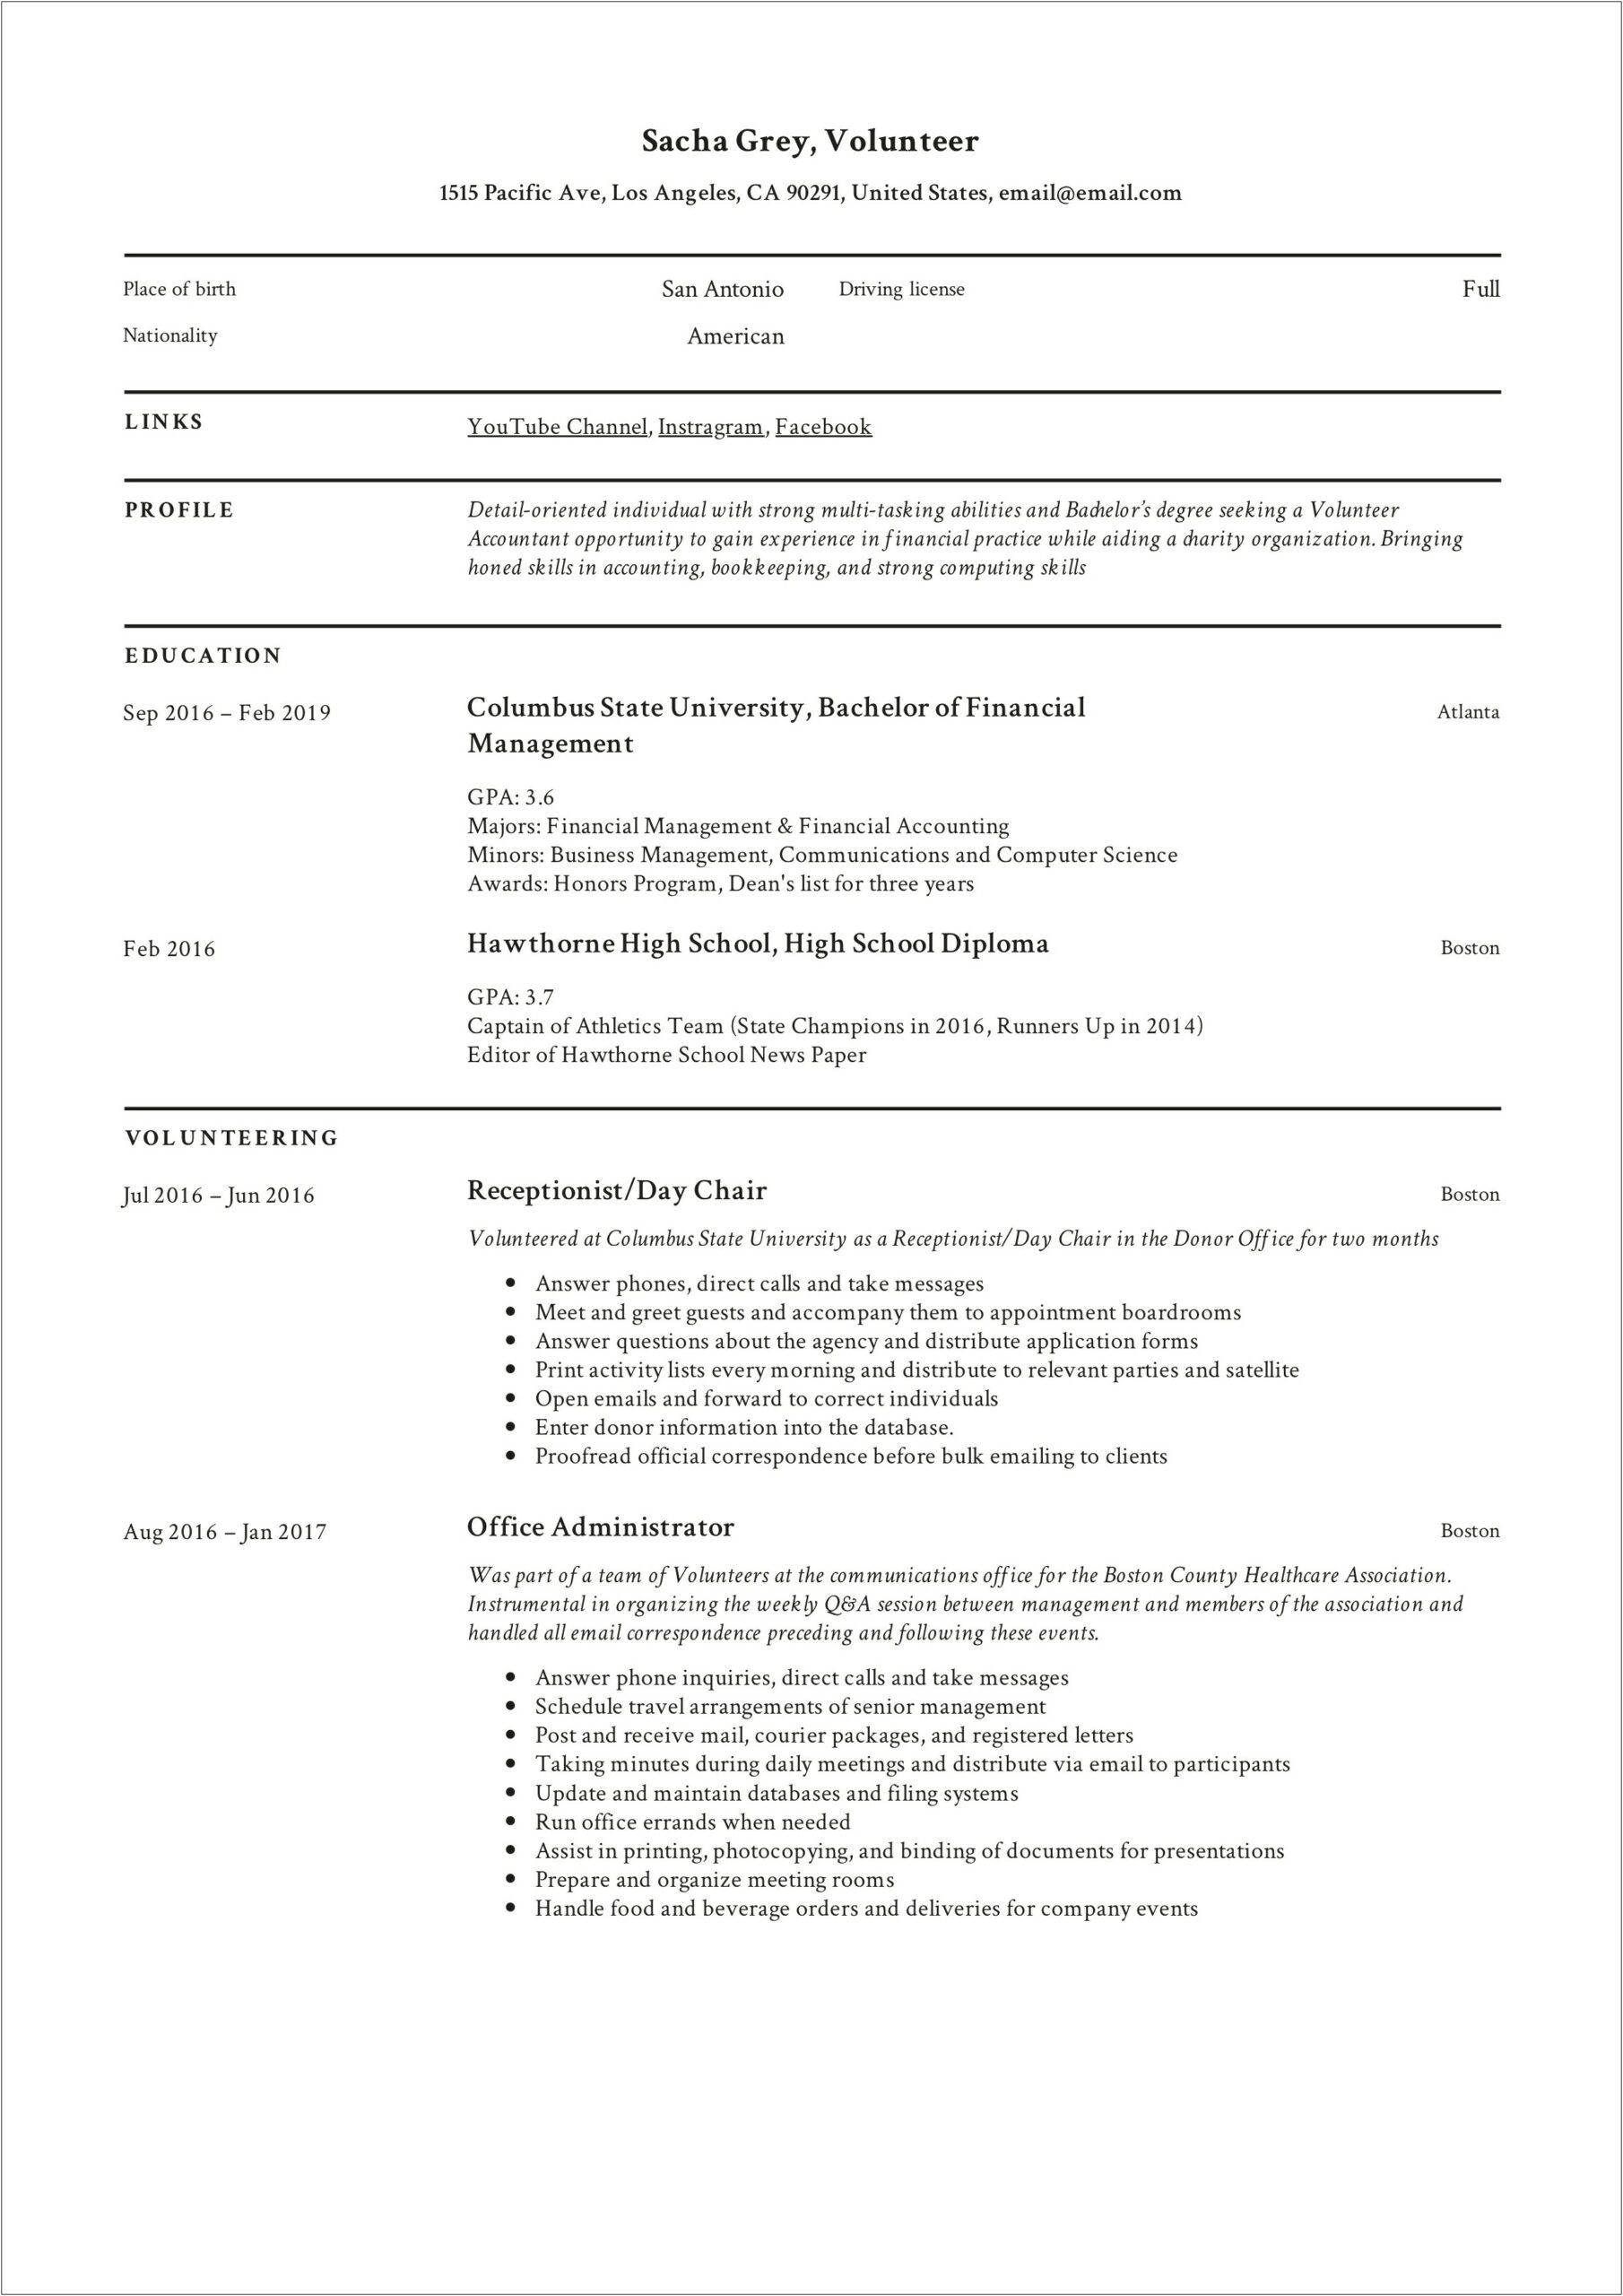 Volunteer Experience On Your Resume Examples